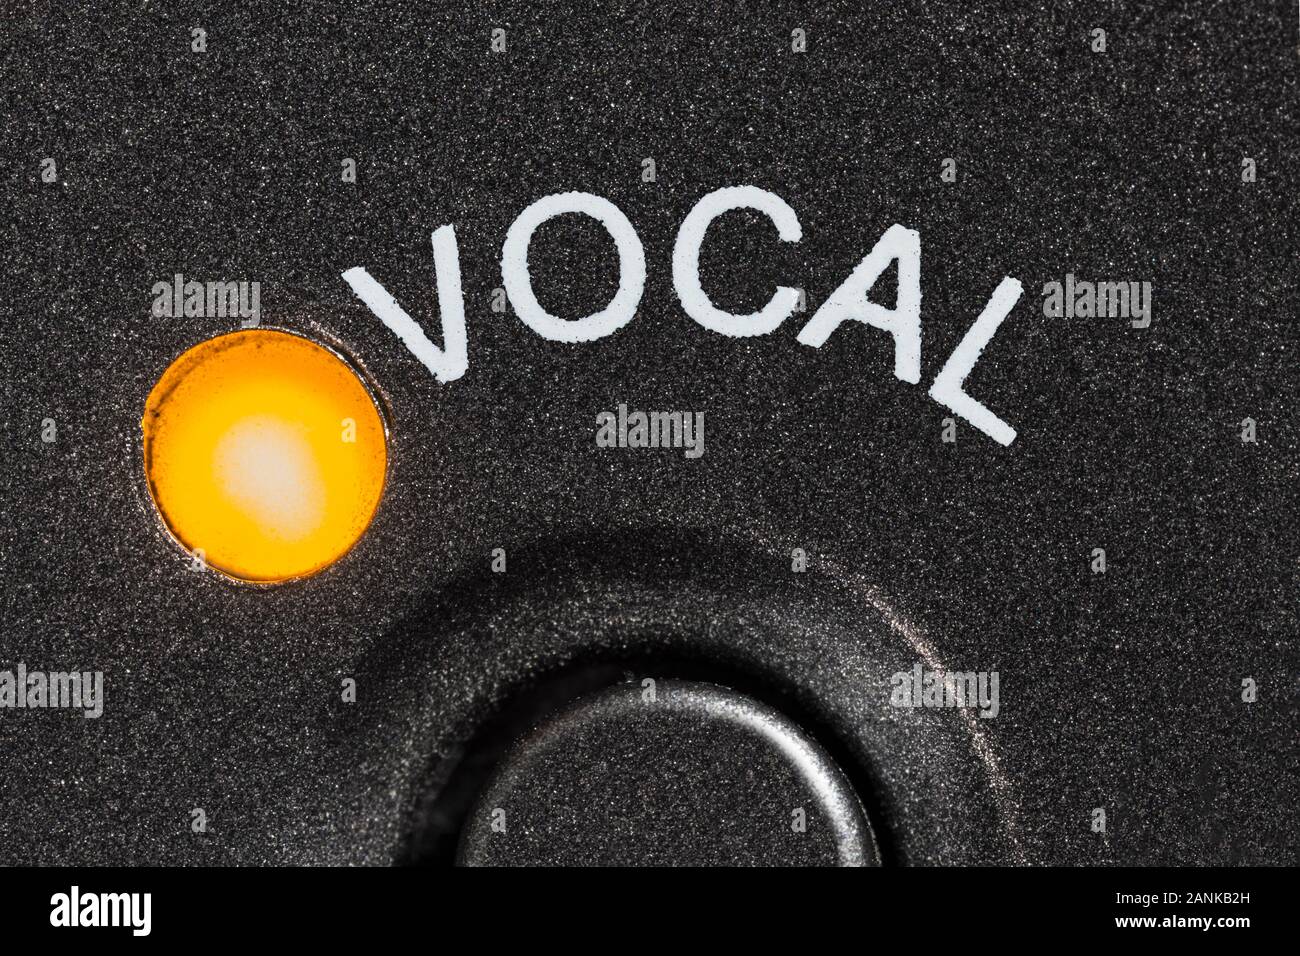 Macro close up photograph of vintage tape machine vocal microphone button and indicator light. Stock Photo